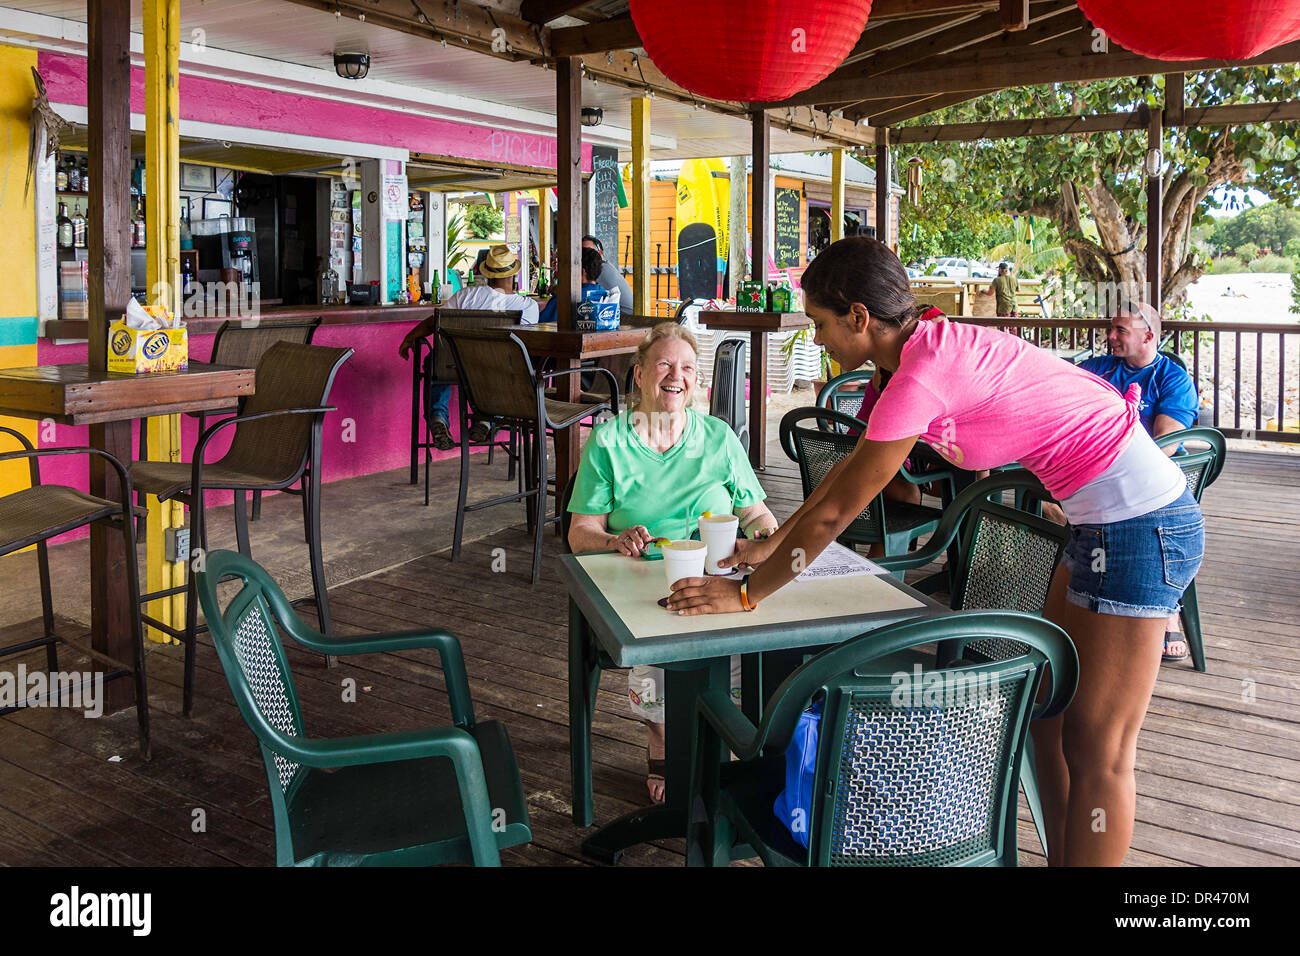 A senior woman interacts with a waitress who is serving margaritas at an outdoor restaurant in St. Croix, U.S. Virgin Islands. Stock Photo